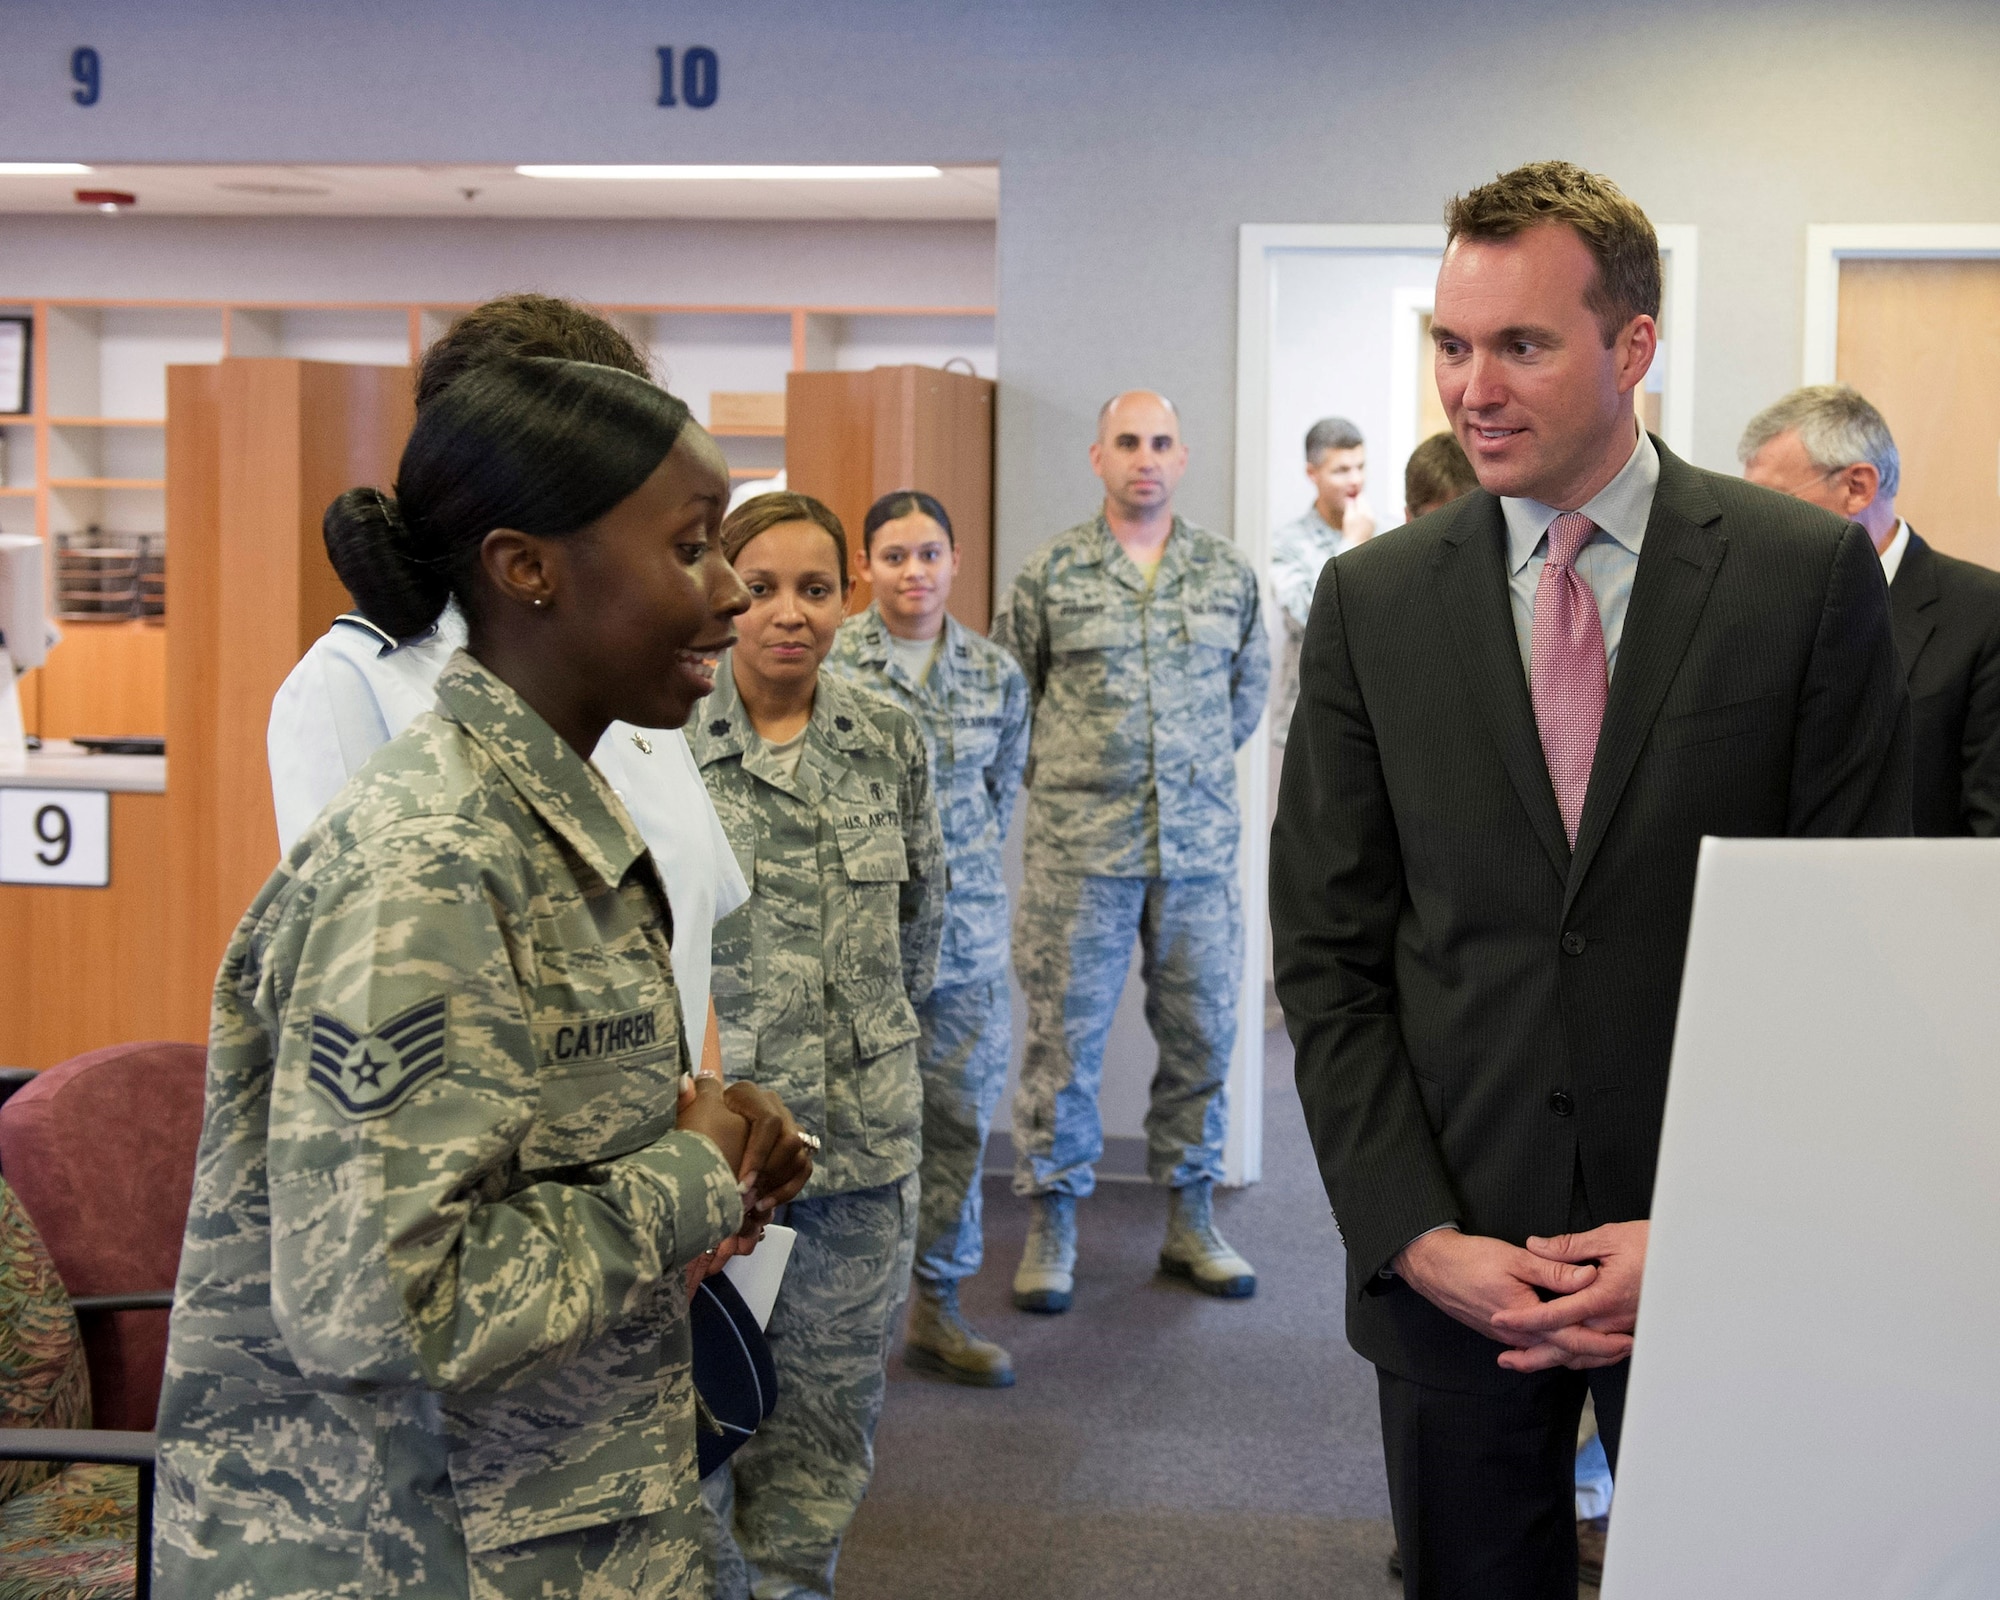 Staff Sgt. Tanisha Cathren describes processes used at the Patrick Air Force Base Satellite Pharmacy to Acting Secretary of the Air Force Eric Fanning Aug 8, 2013. Cathren is a pharmacy technician with the 45th Medical Group.  (U.S. Air Force photo/Matthew Jurgens)